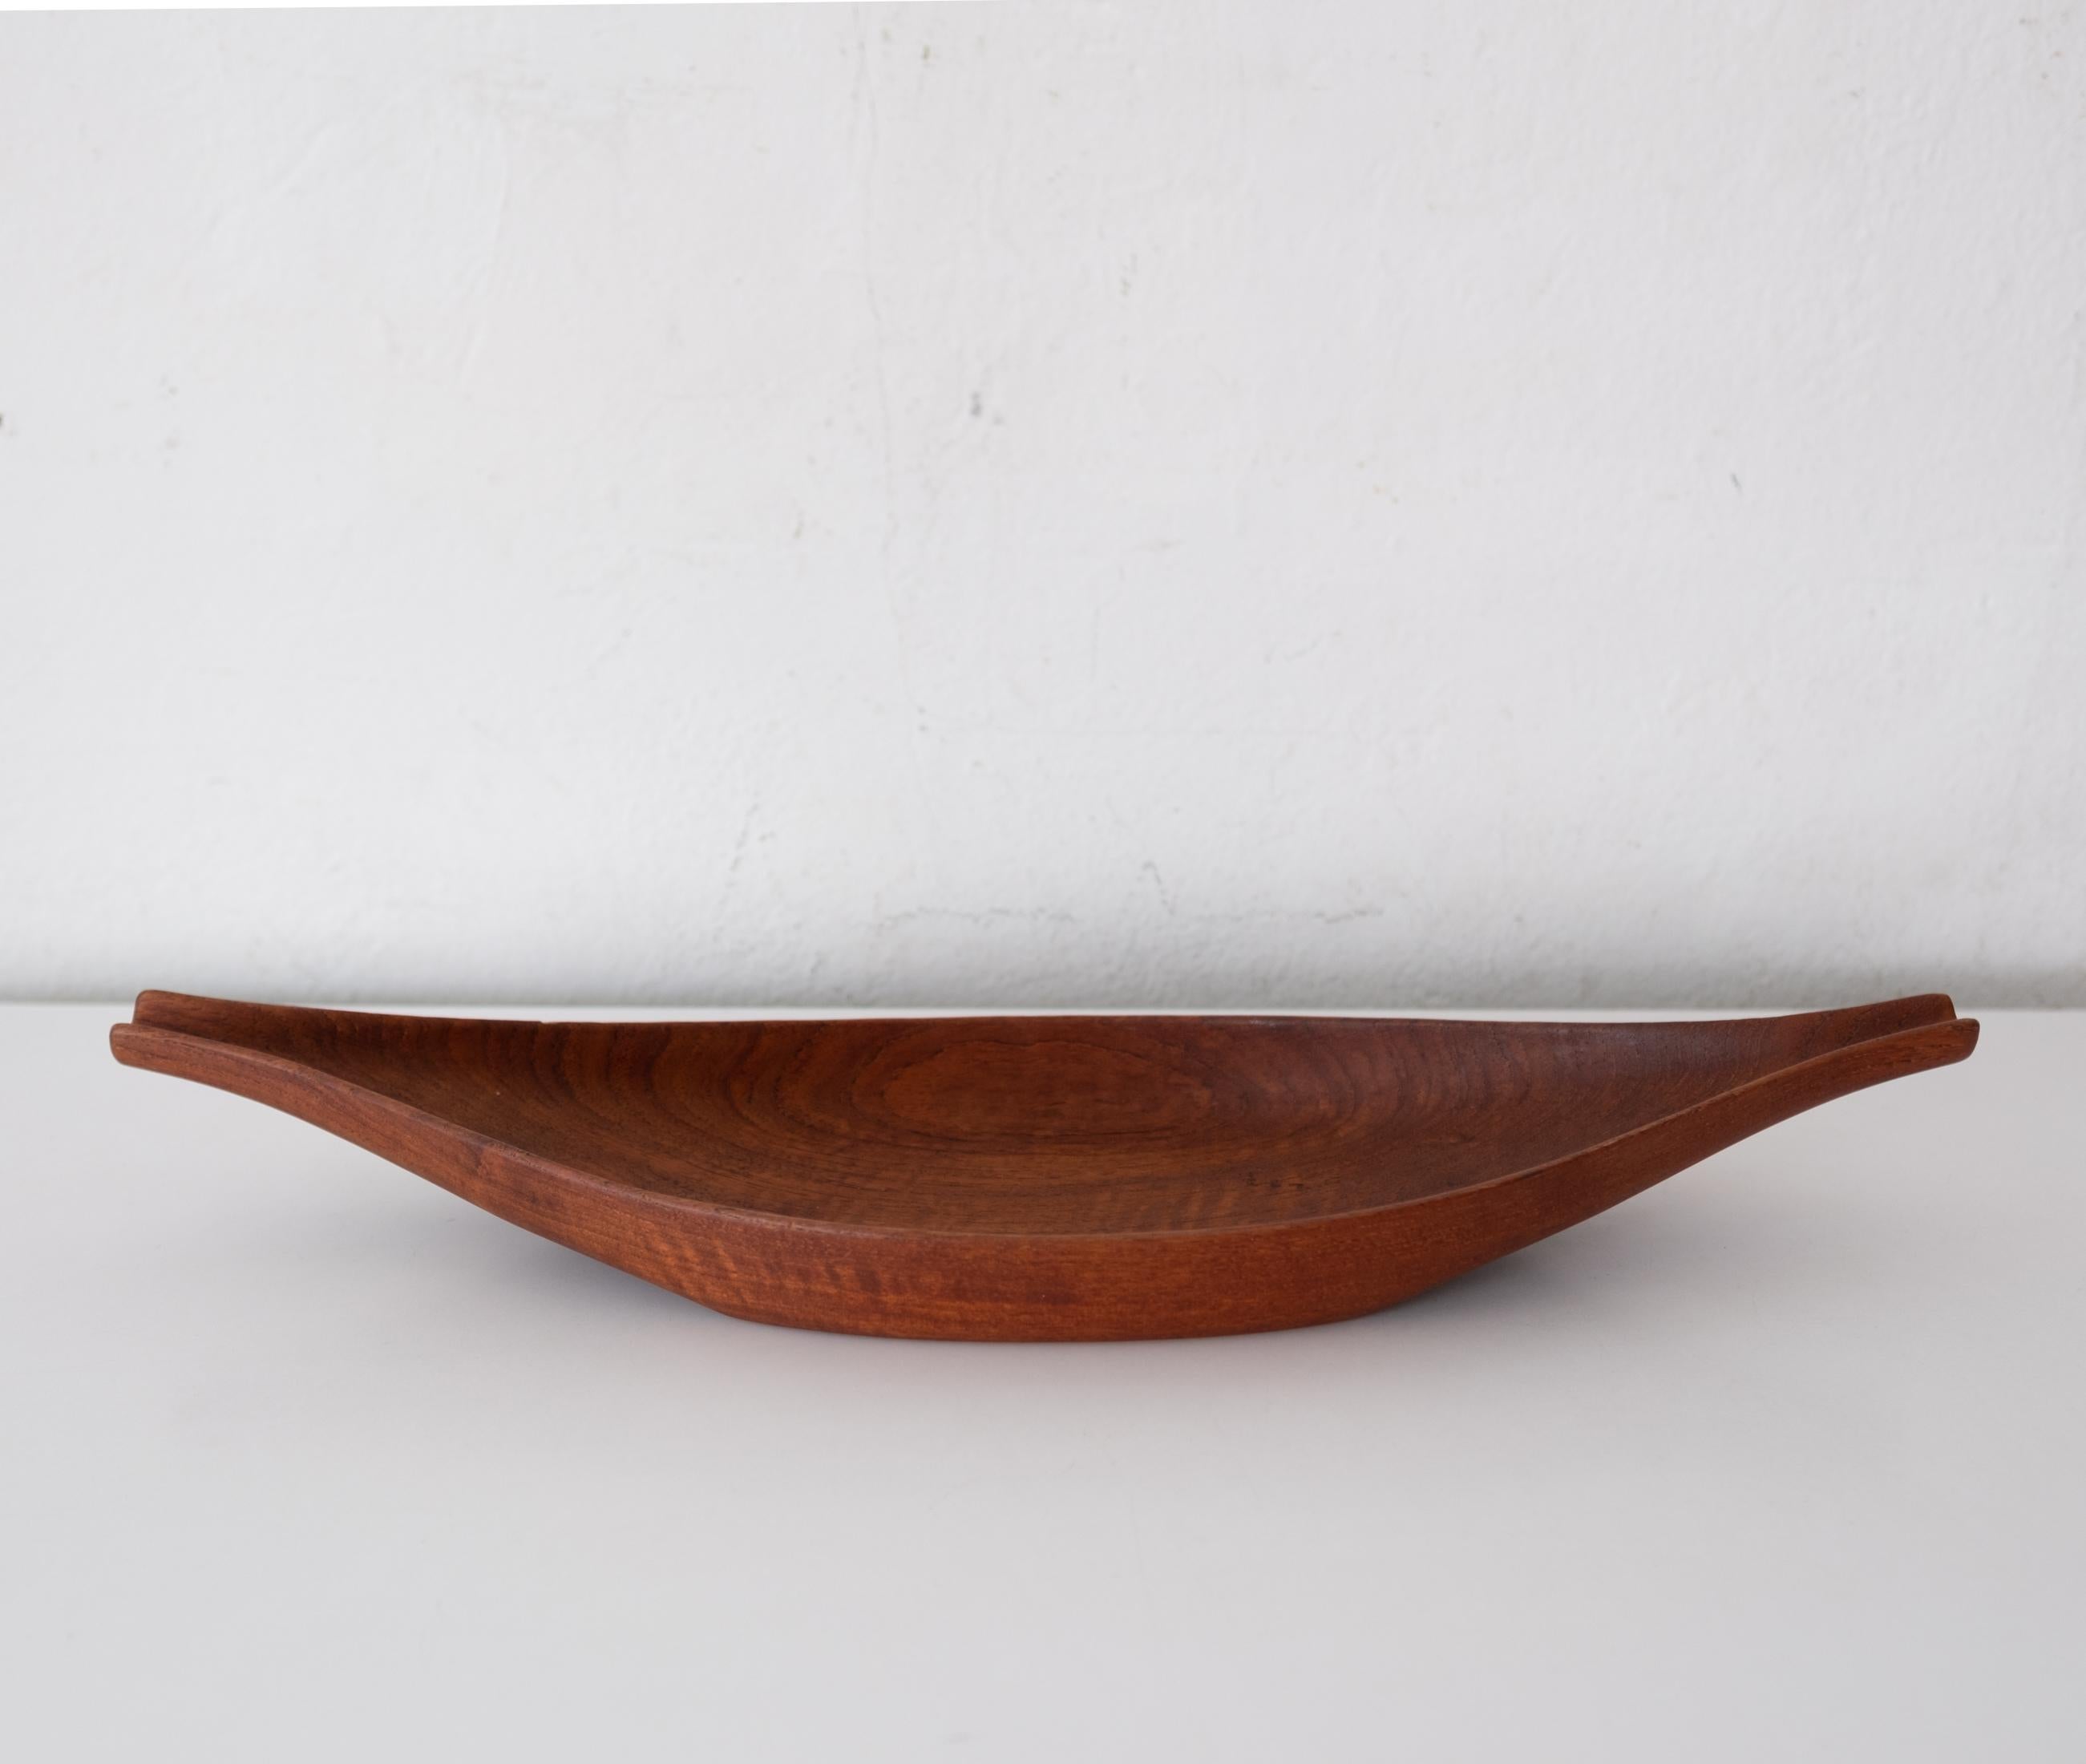 Sculptural Midcentury Italian Wood Fruit Bowl or Catch All by Anri, 1950s For Sale 7